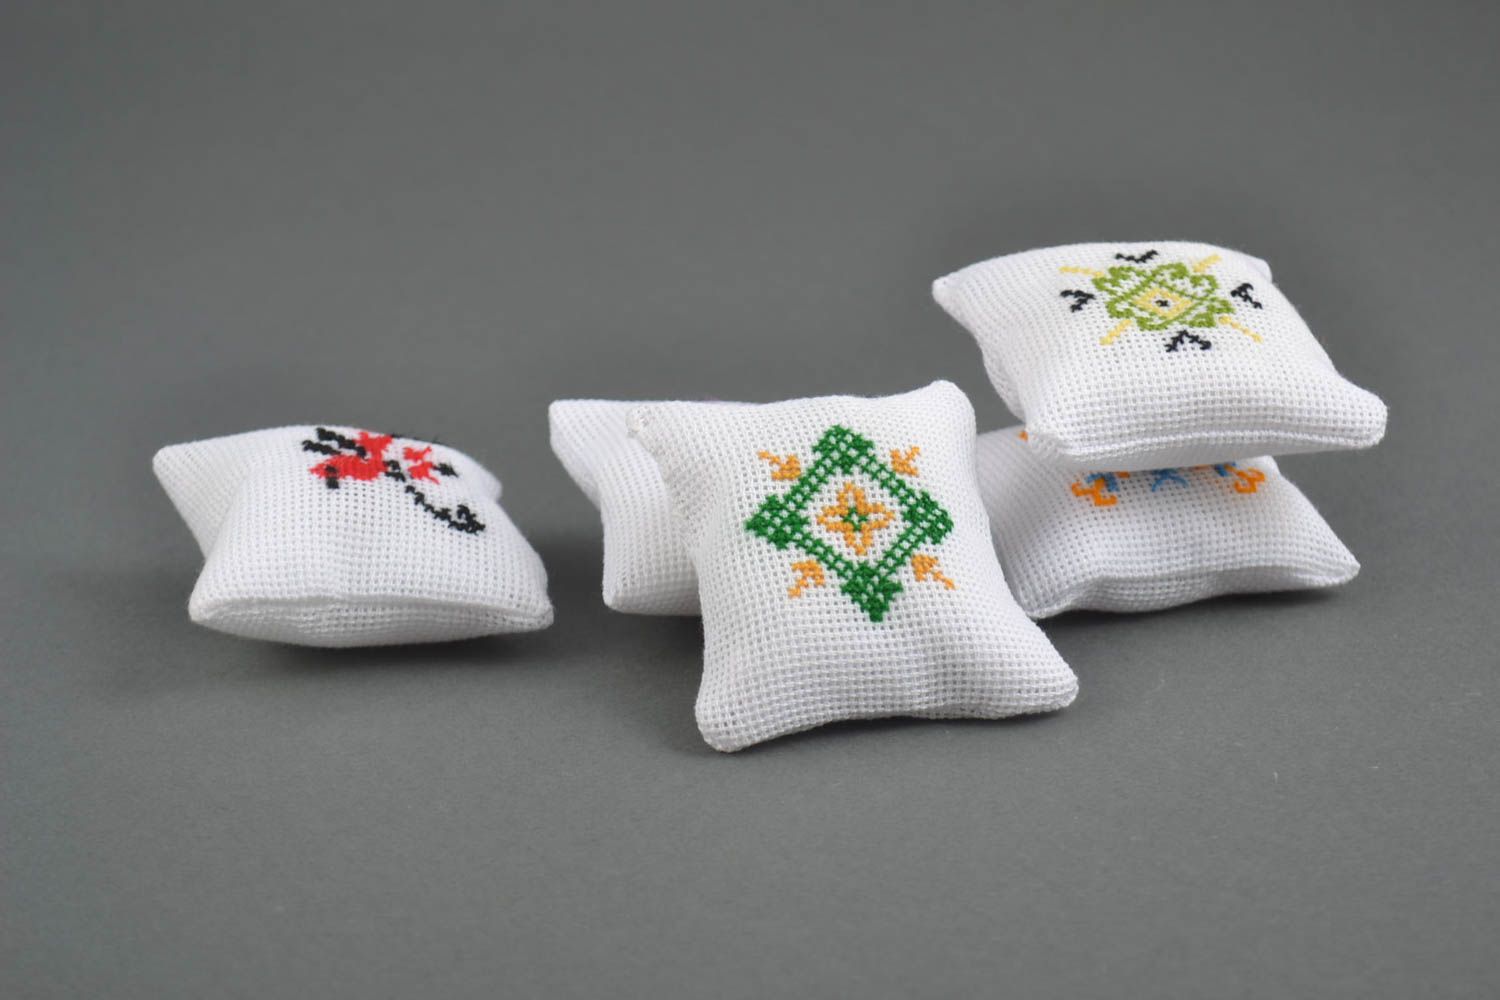 Handmade sewing accessories 5 pin cushions needle cases embroidery kits photo 5